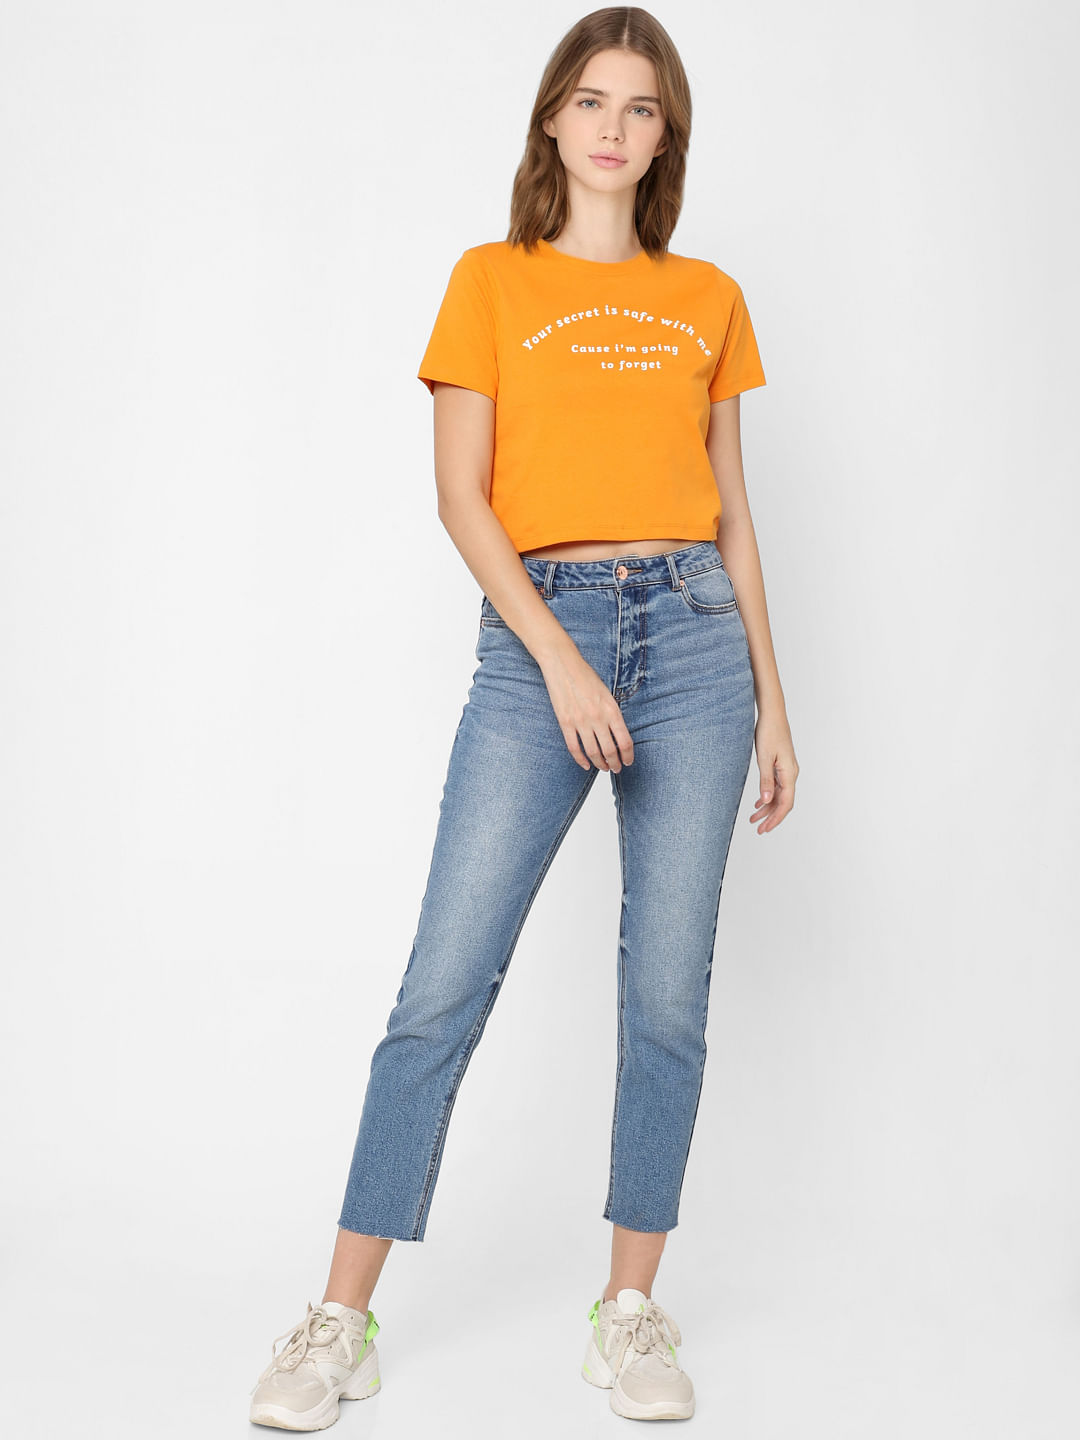 Cropped T-shirt for Women